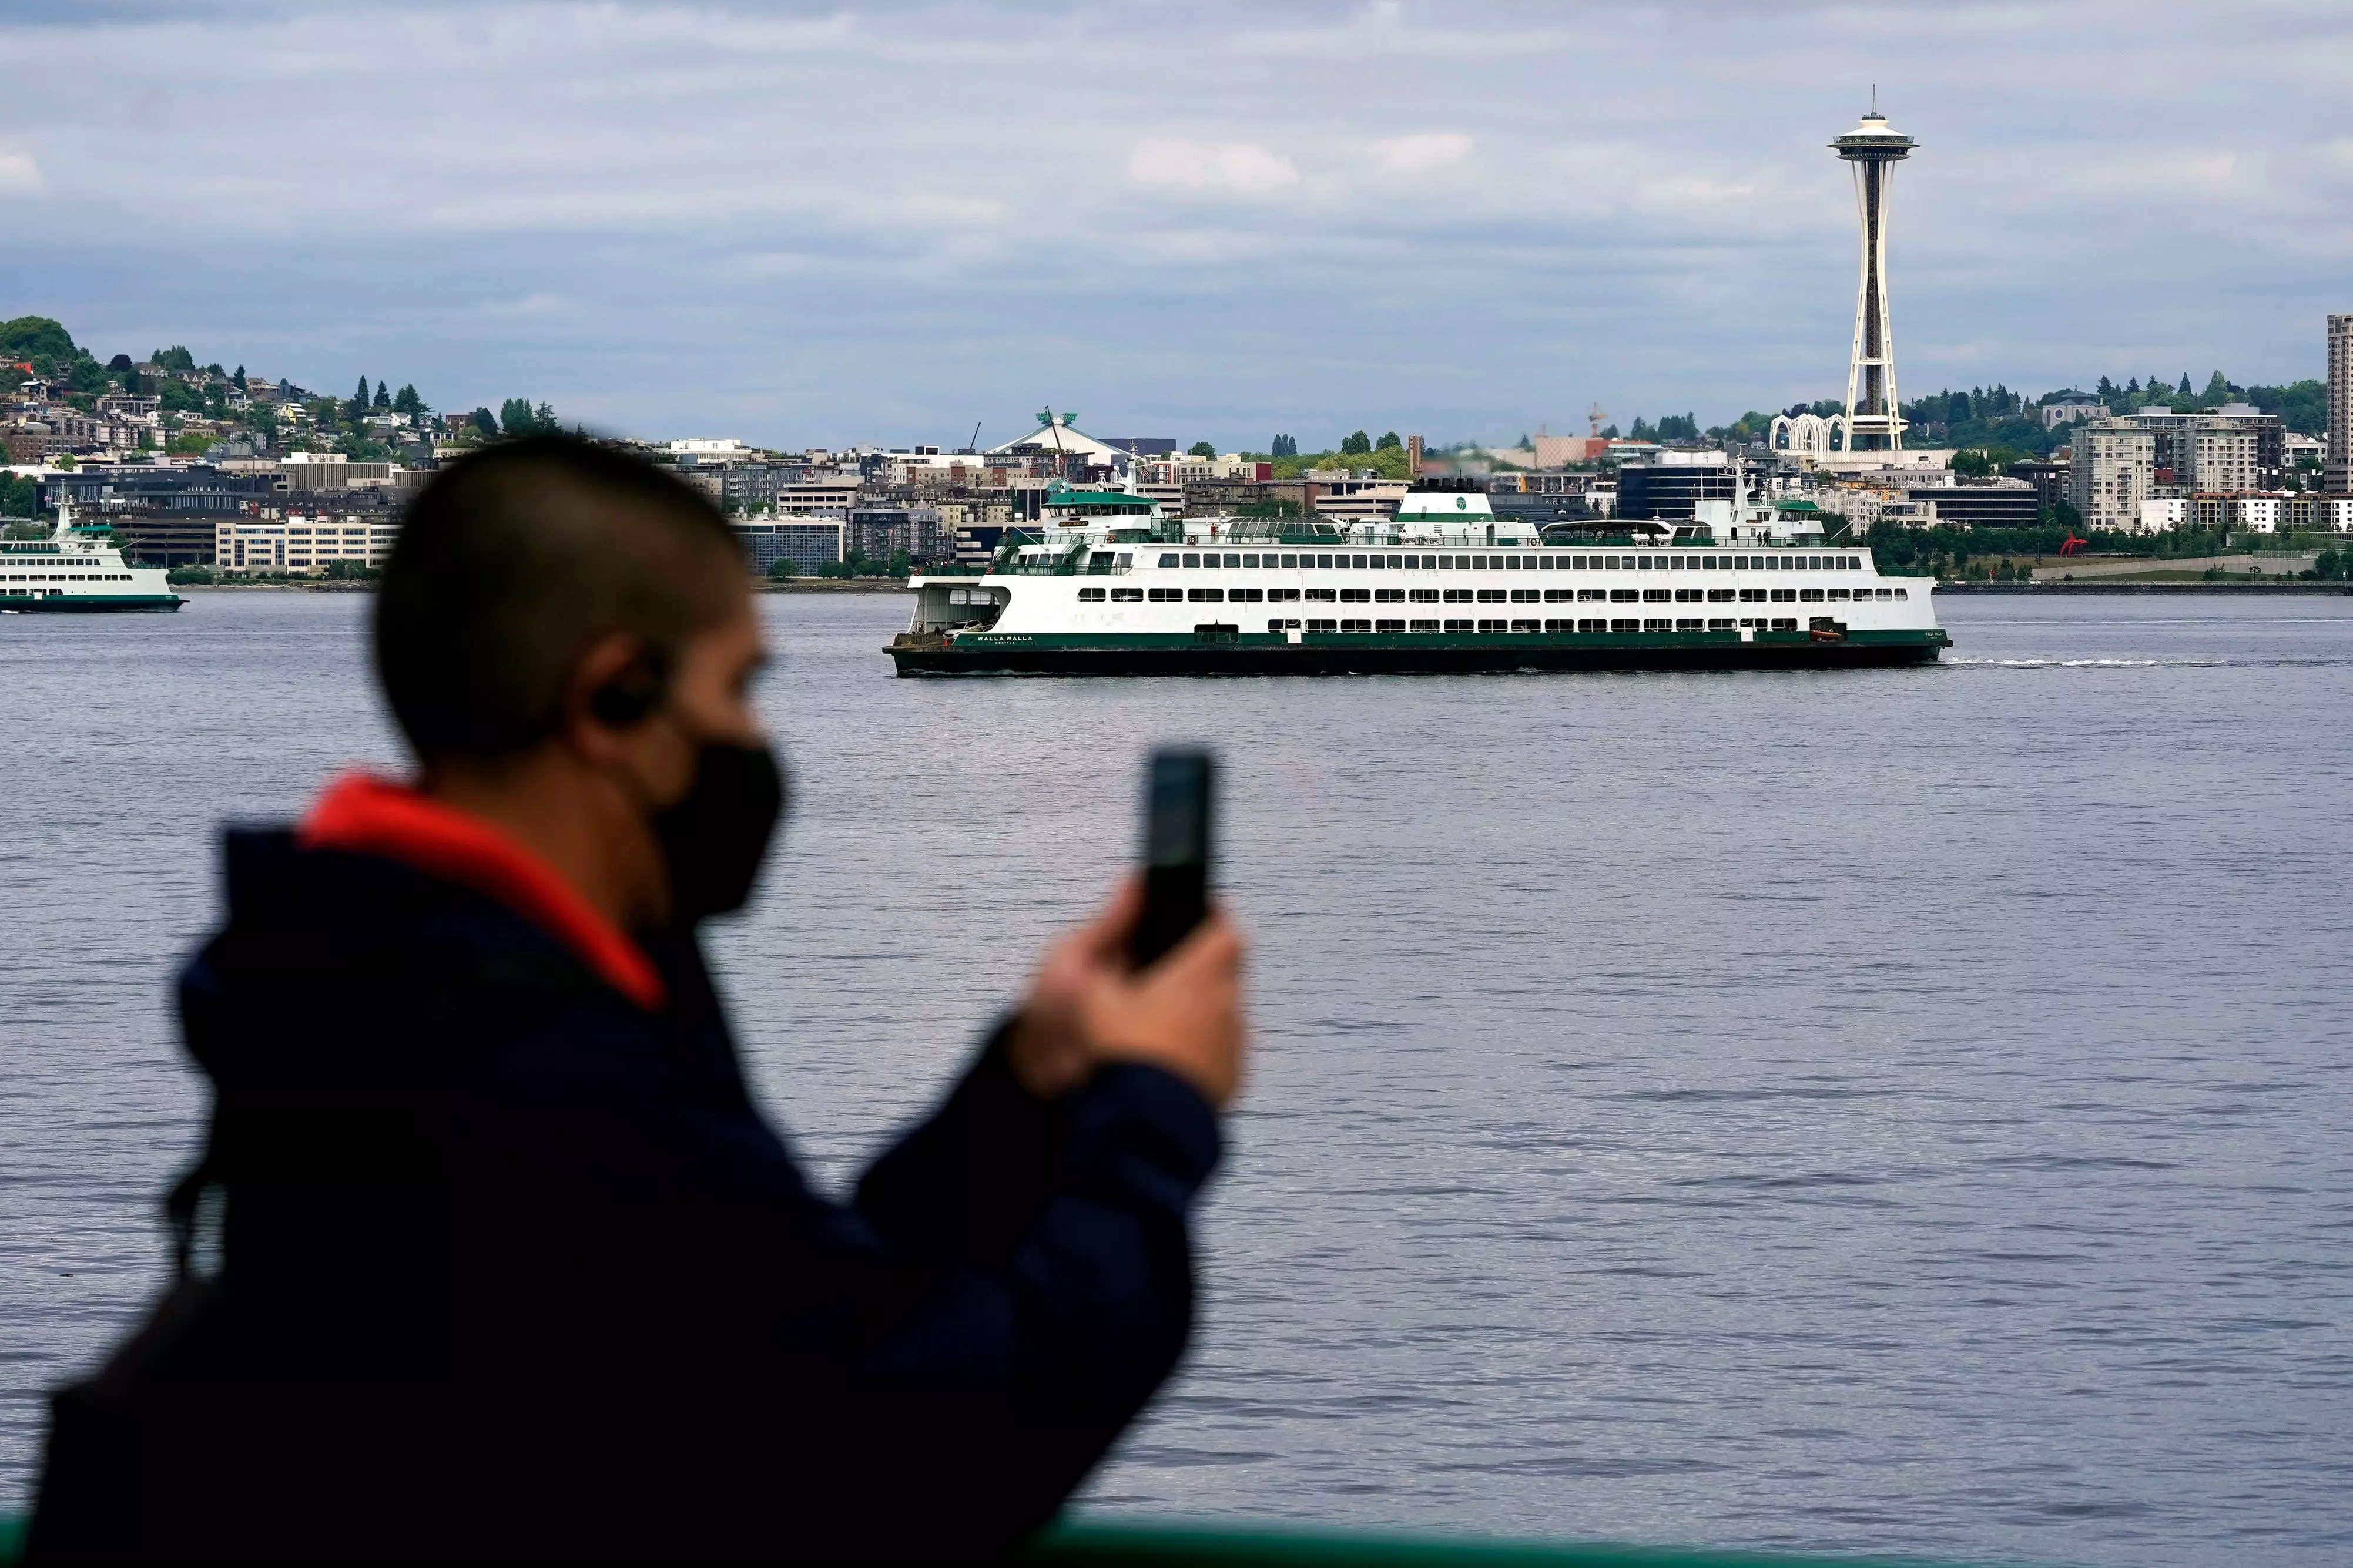 Washington State Ferries, the country's largest ferry system